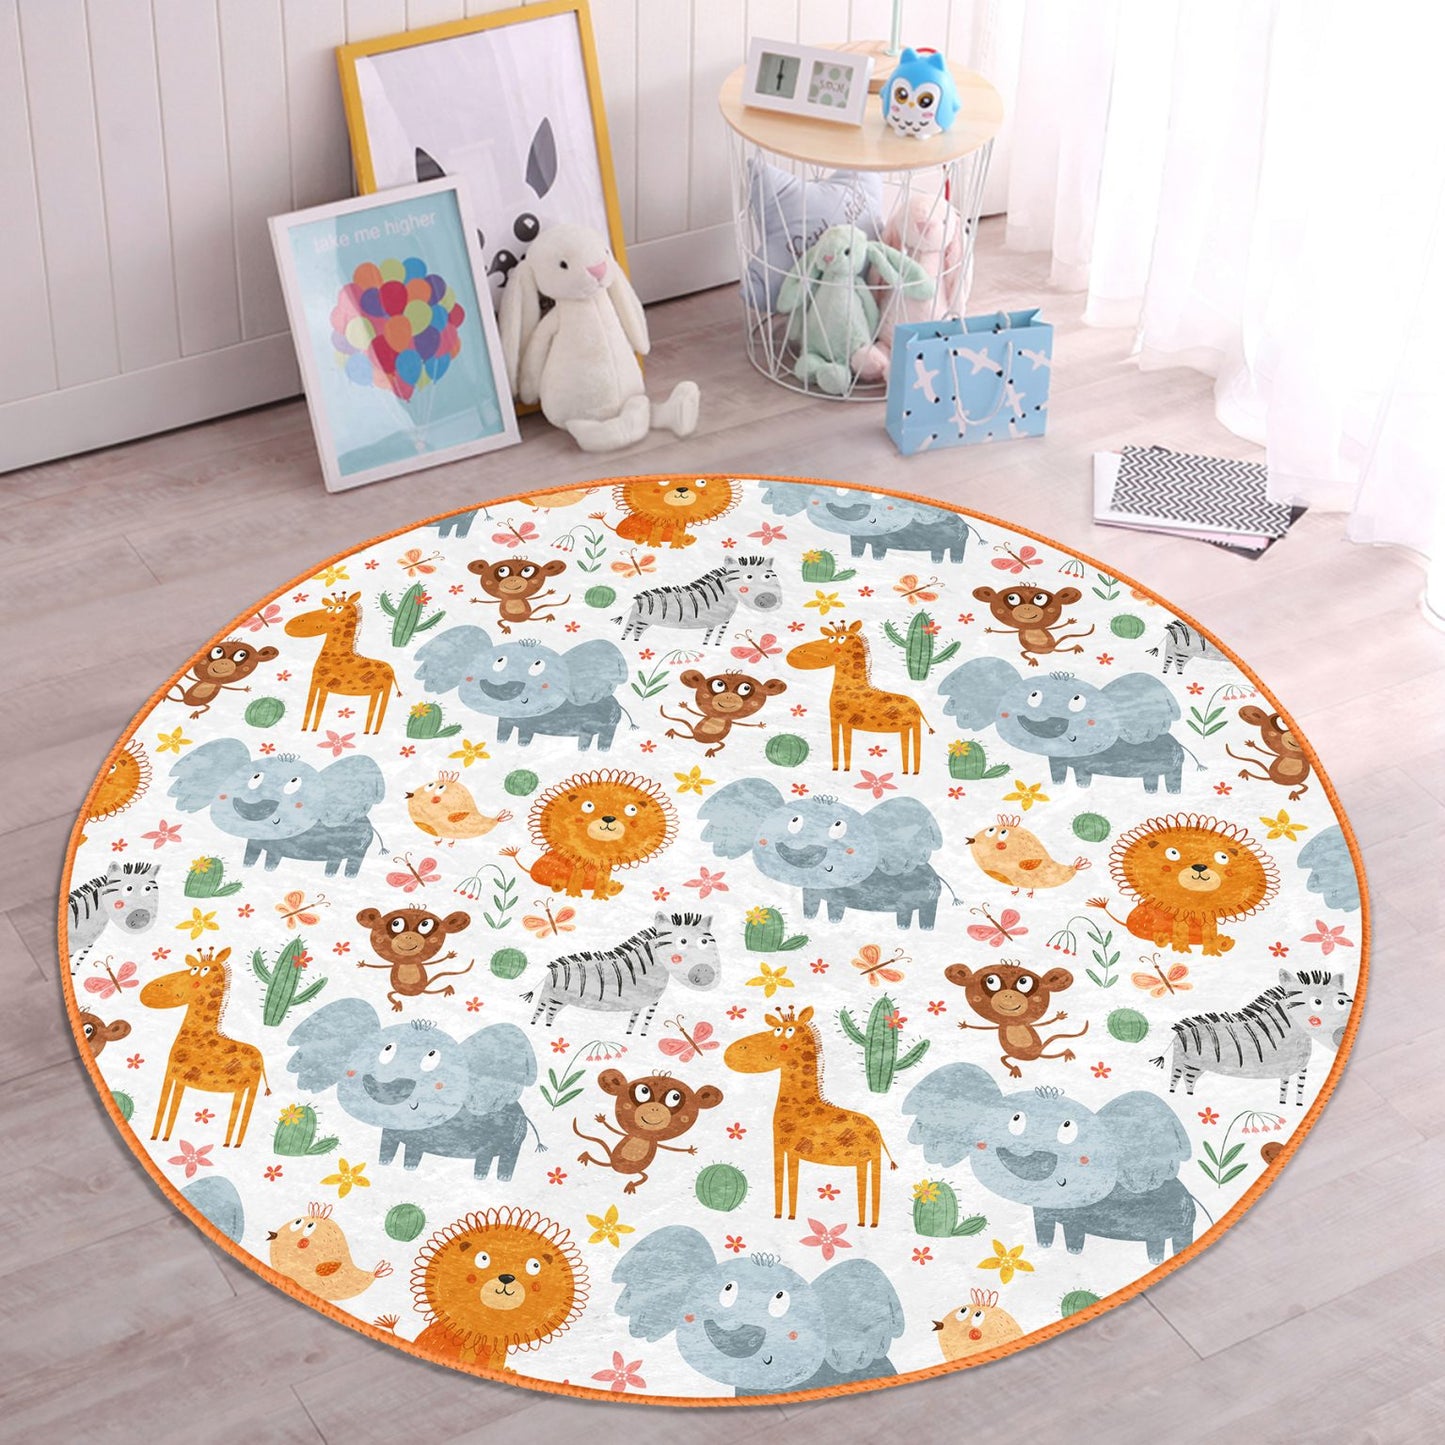 Charming Animal Patterned Area Rug for Kids